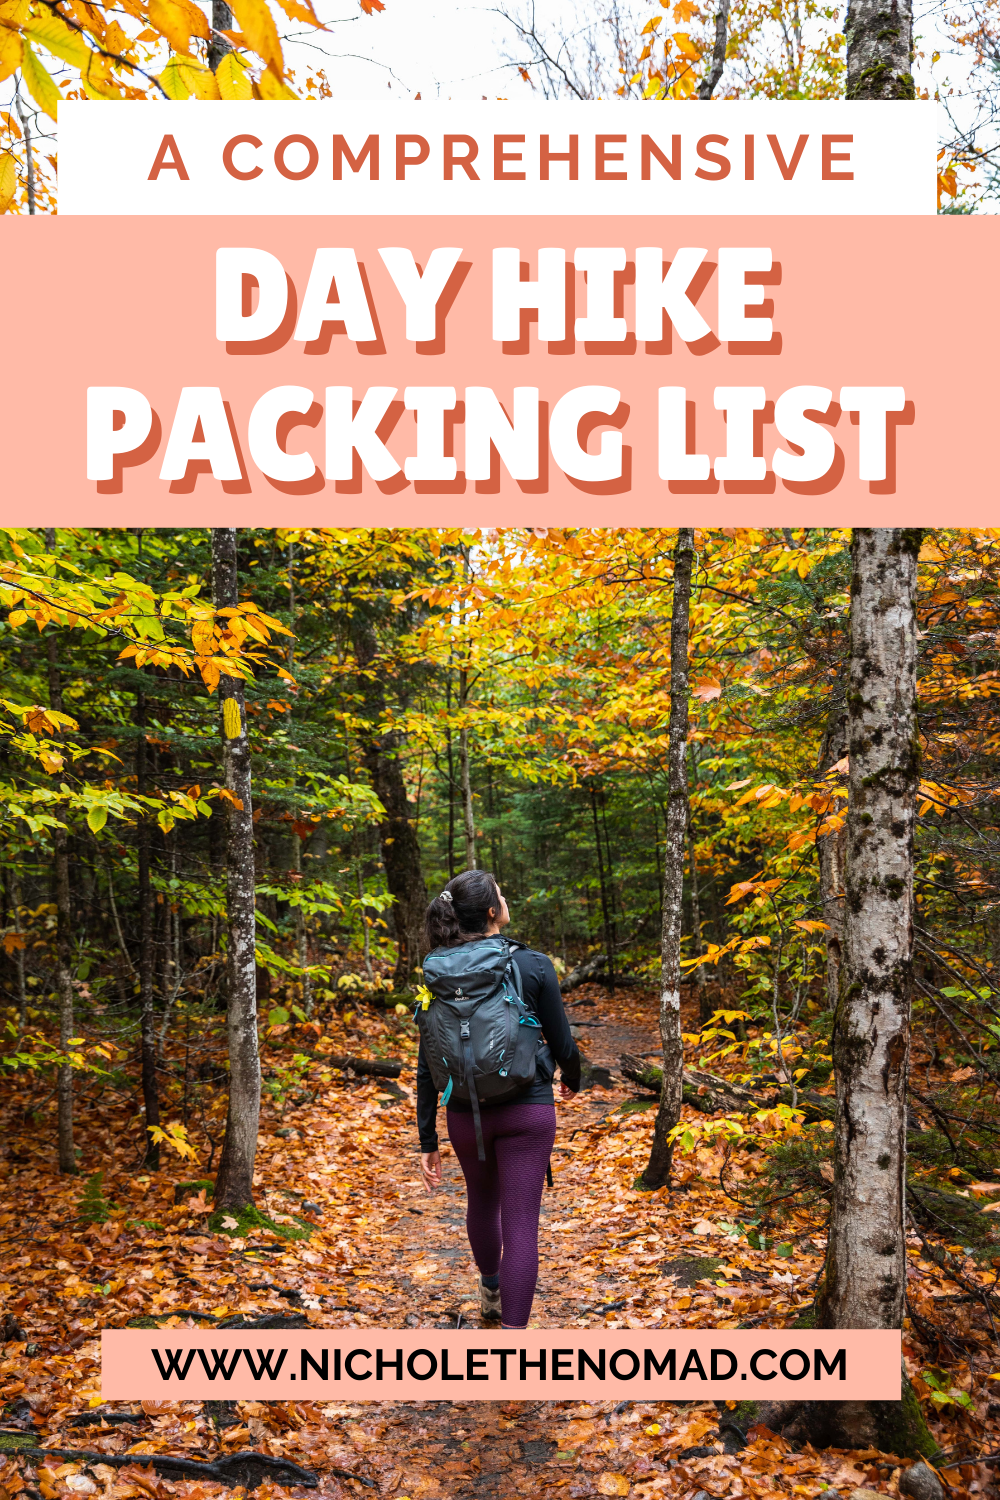 Day Hike Packing List: What to Pack for Day Hiking — Nichole the Nomad